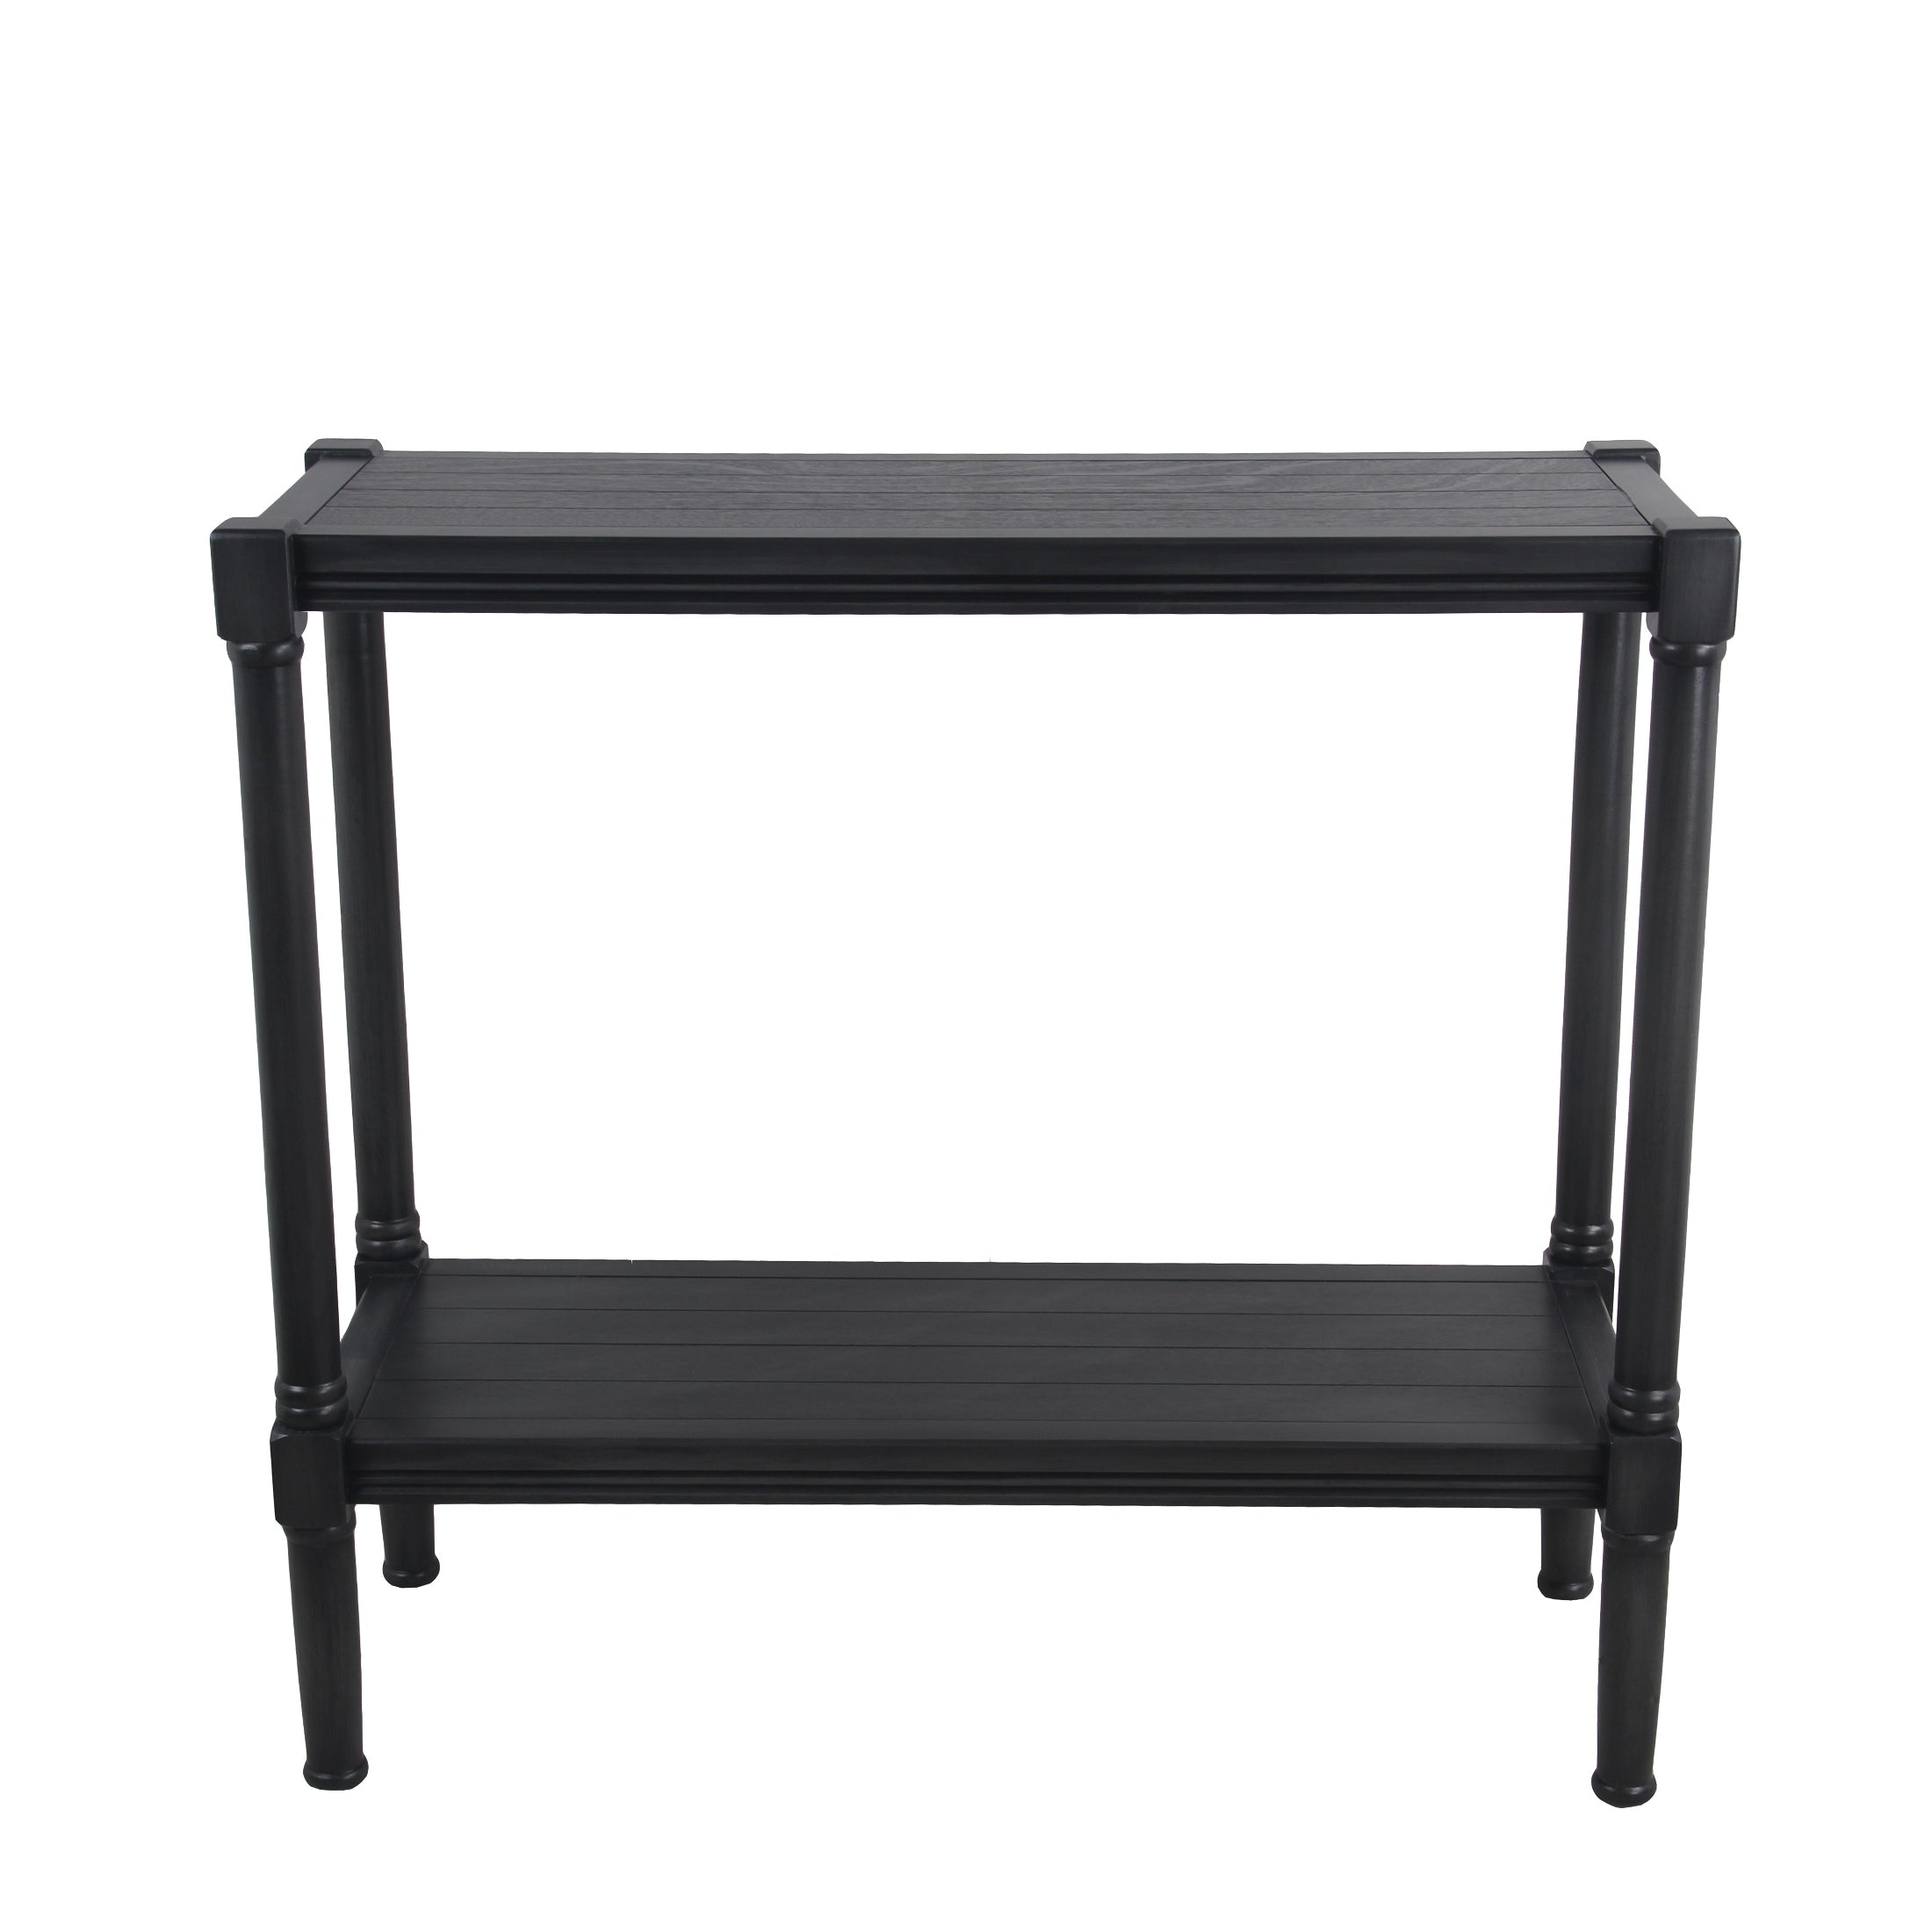 Wooden Rectangular Console Table with One Spacious Open Shelf, Black